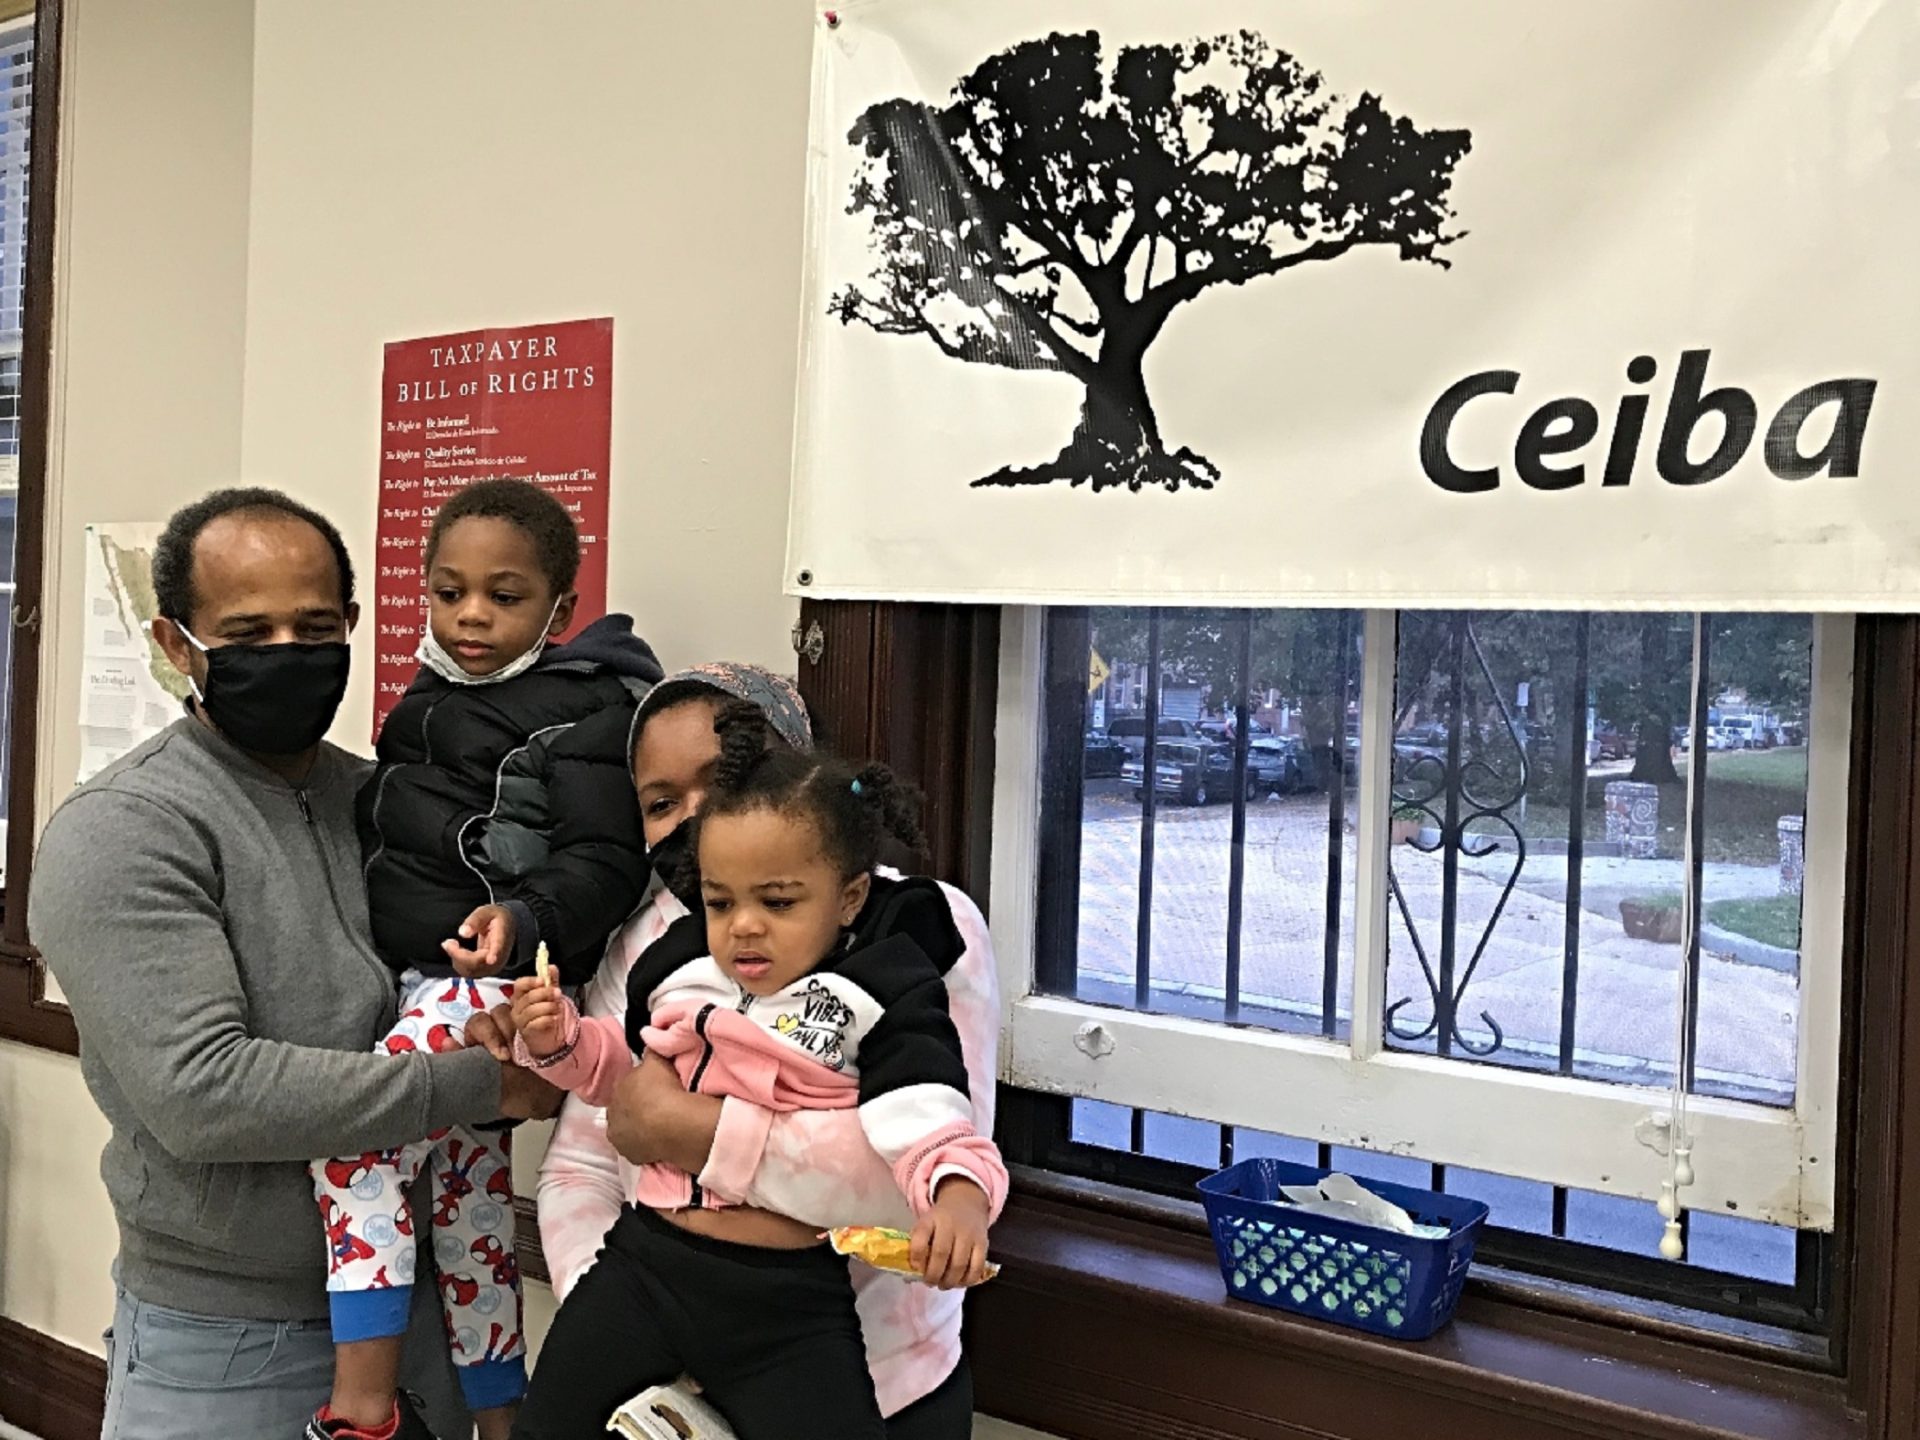 Jose and Rosa hold their children, Helen and Patrick, after getting tax help at Ceiba’s office in Philadelphia.